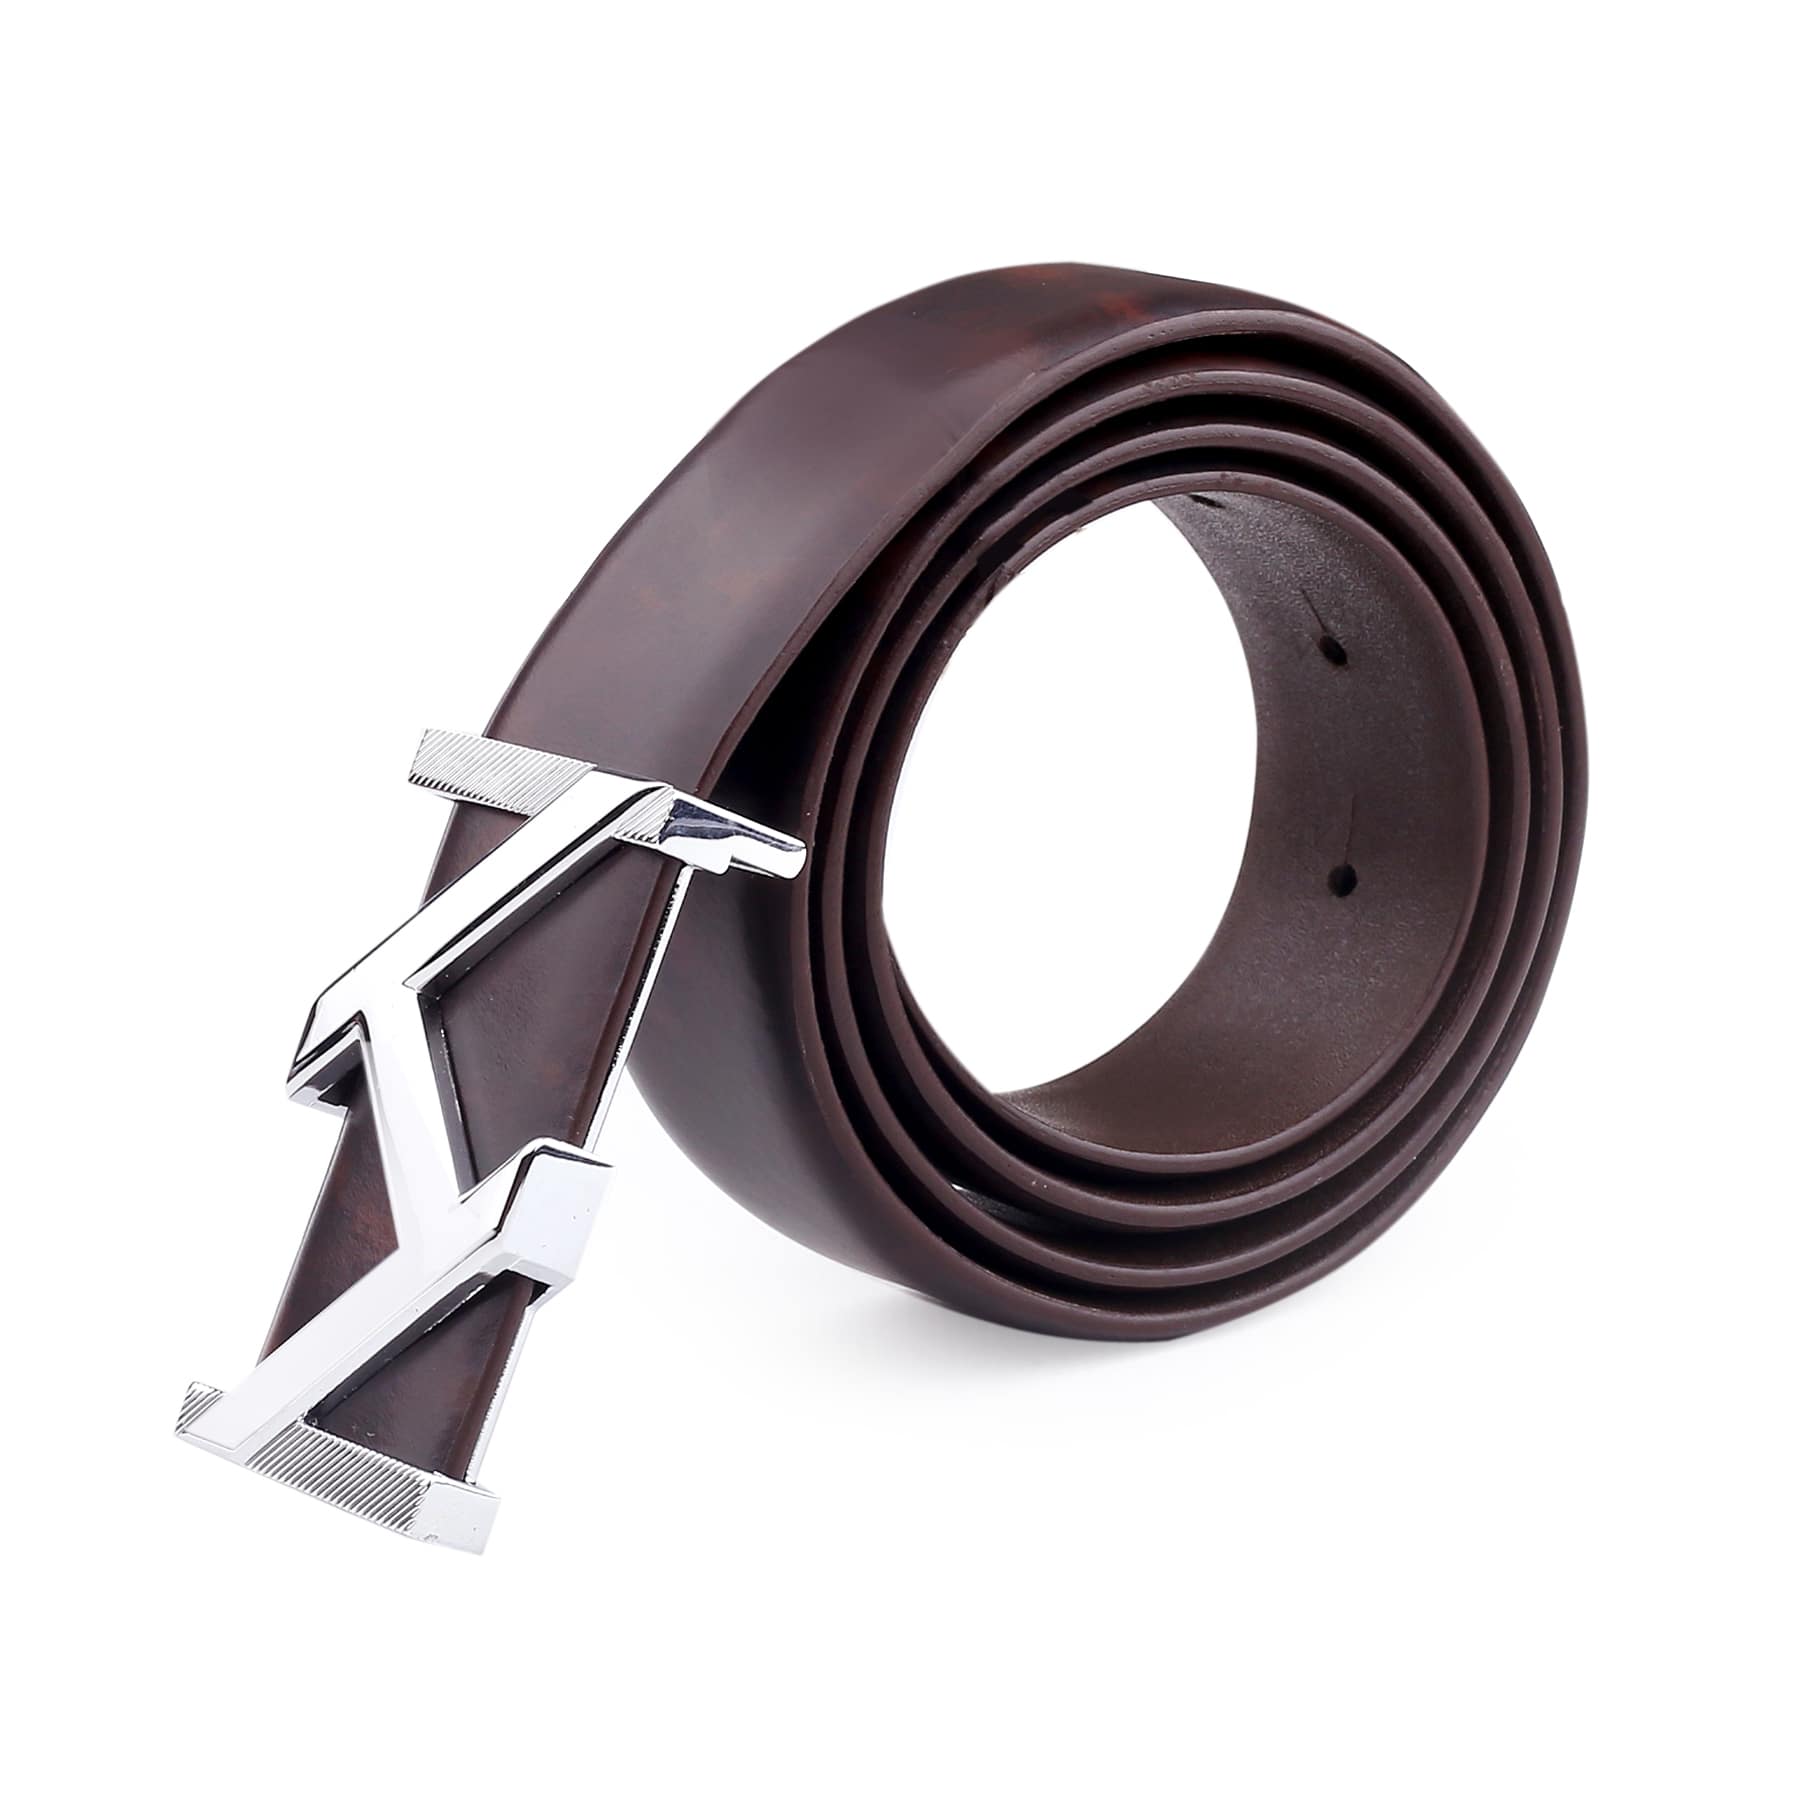 Bacca Bucci Premium Leather Formal Dress Belts with a Stylish Finish